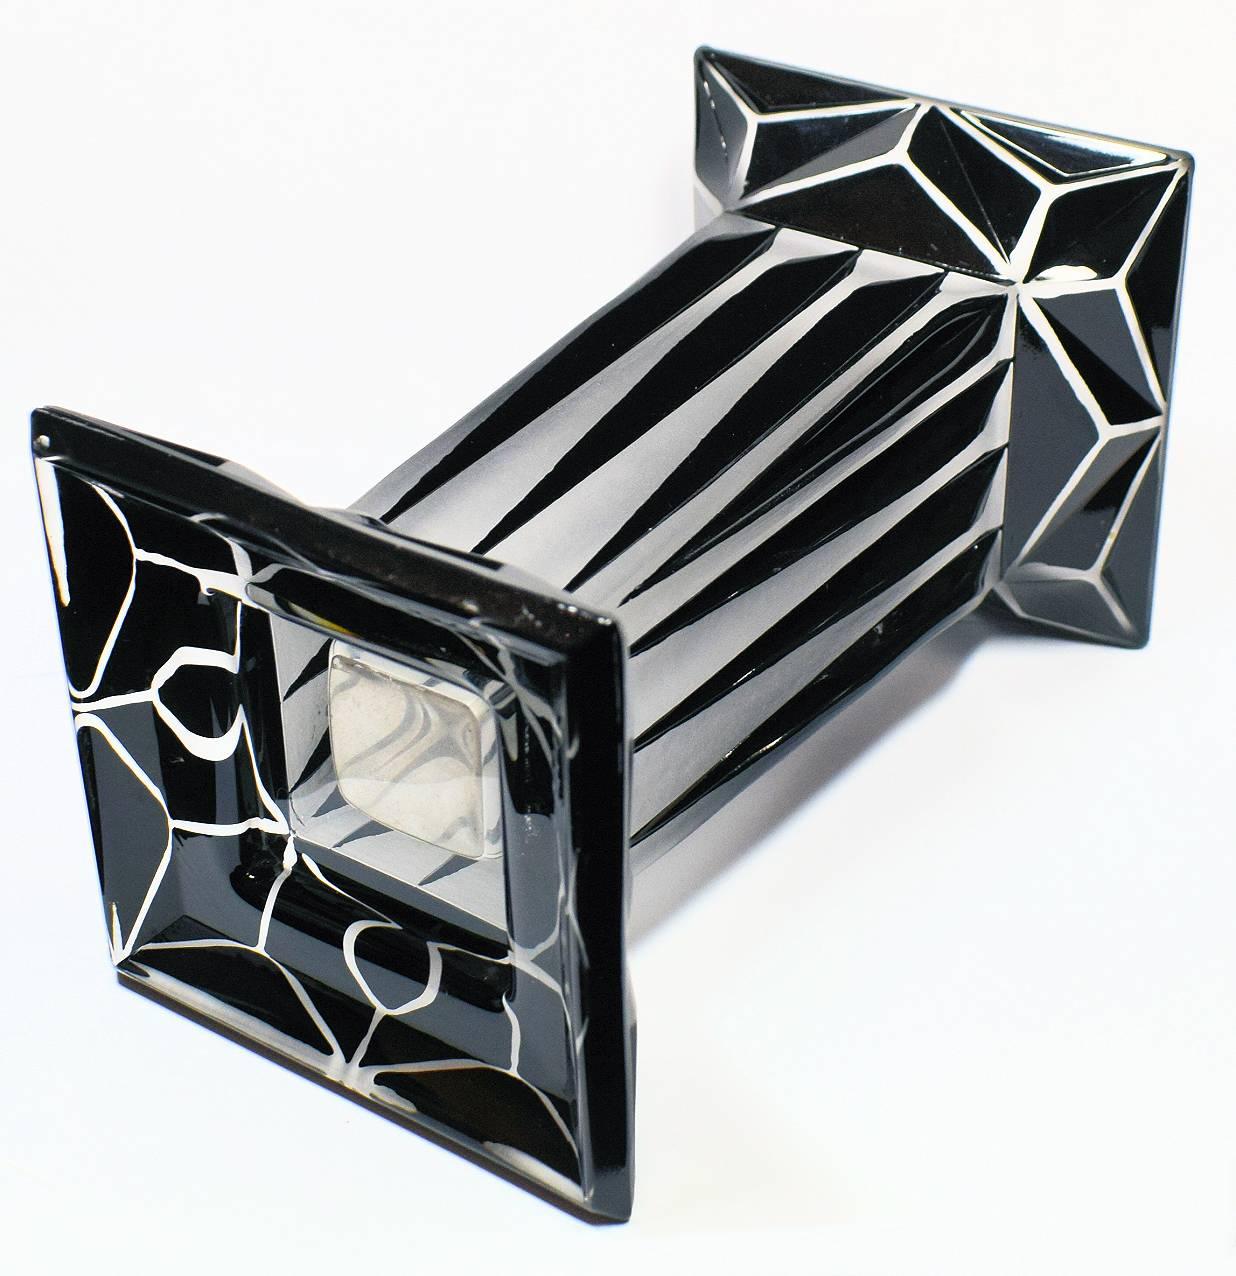 Rare and very stylish geometric patterned vase by a Karl Palda. Great size for modern day use, please see dimensions. With the black enamel decoration against clear crystal glass makes this a very striking design, simple but very elegant. Condition